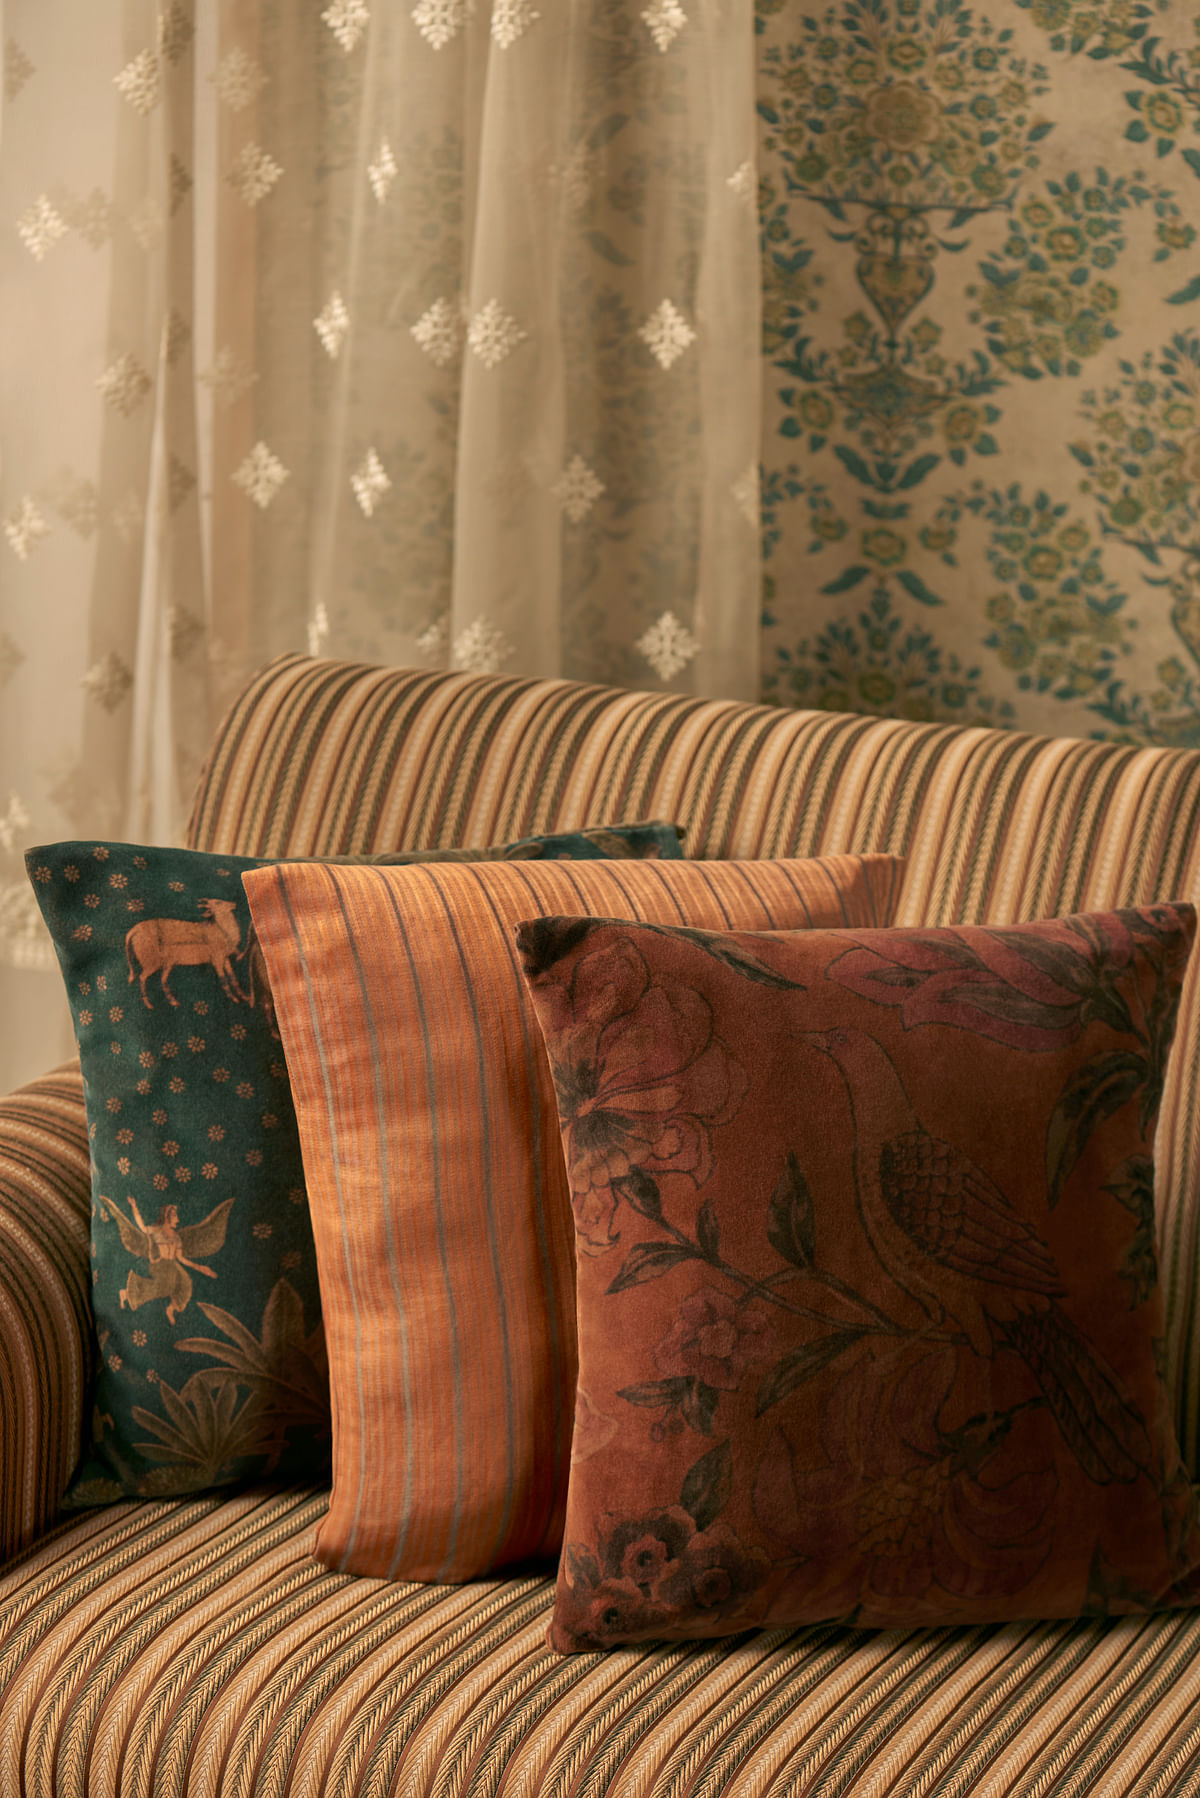 Crafted by Sabyasachi for Nilaya, the Heartland collection is a first-of-its-kind range of furnishing fabrics.